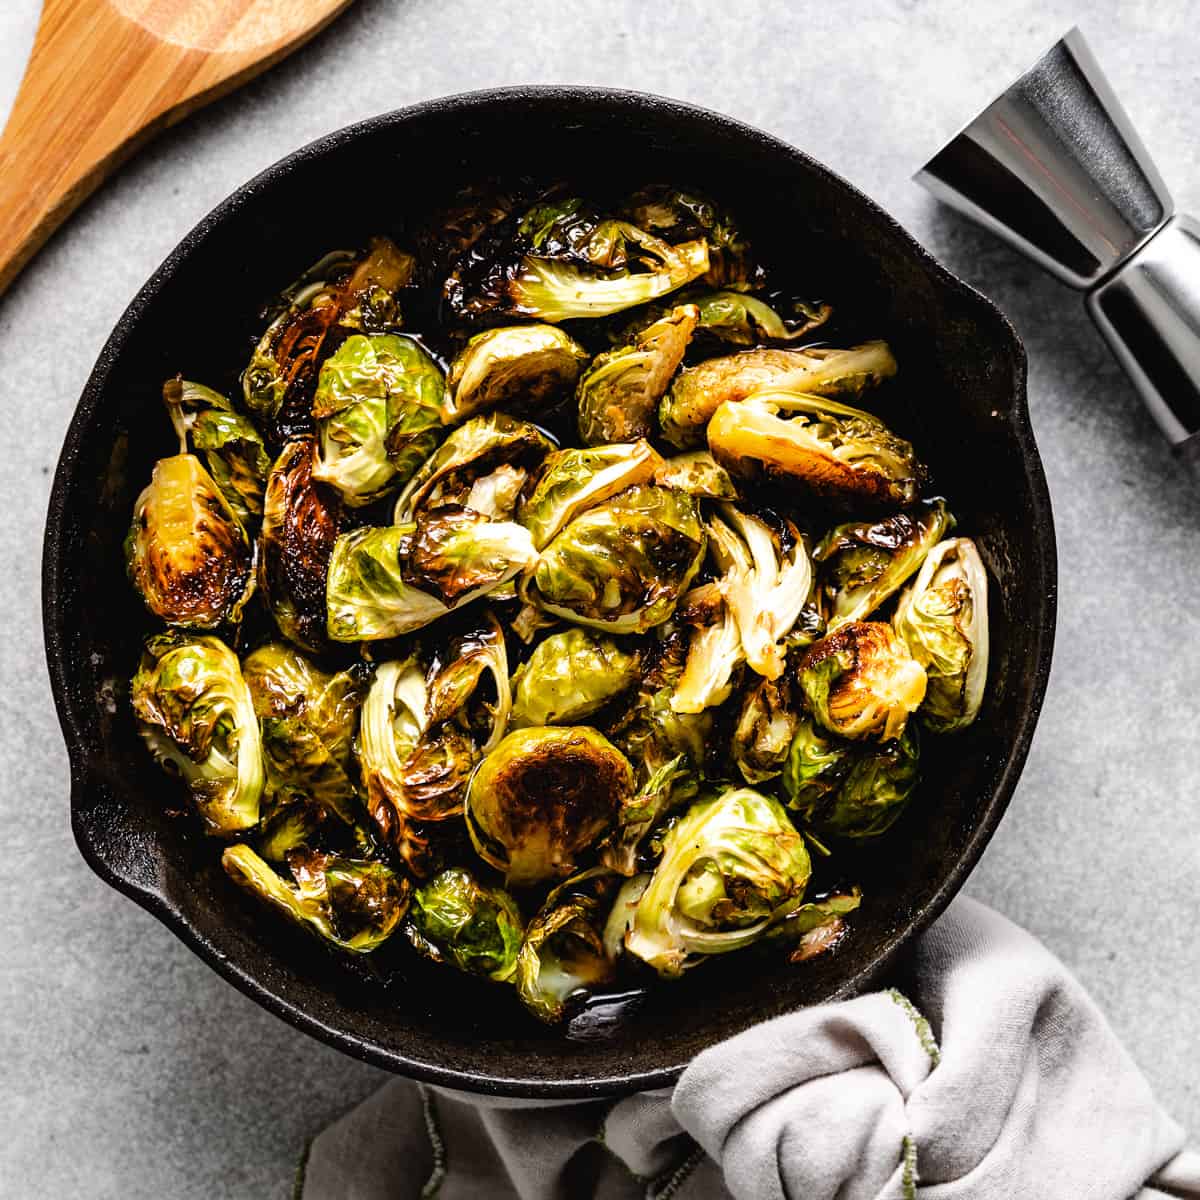 Maple bourbon brussels sprouts